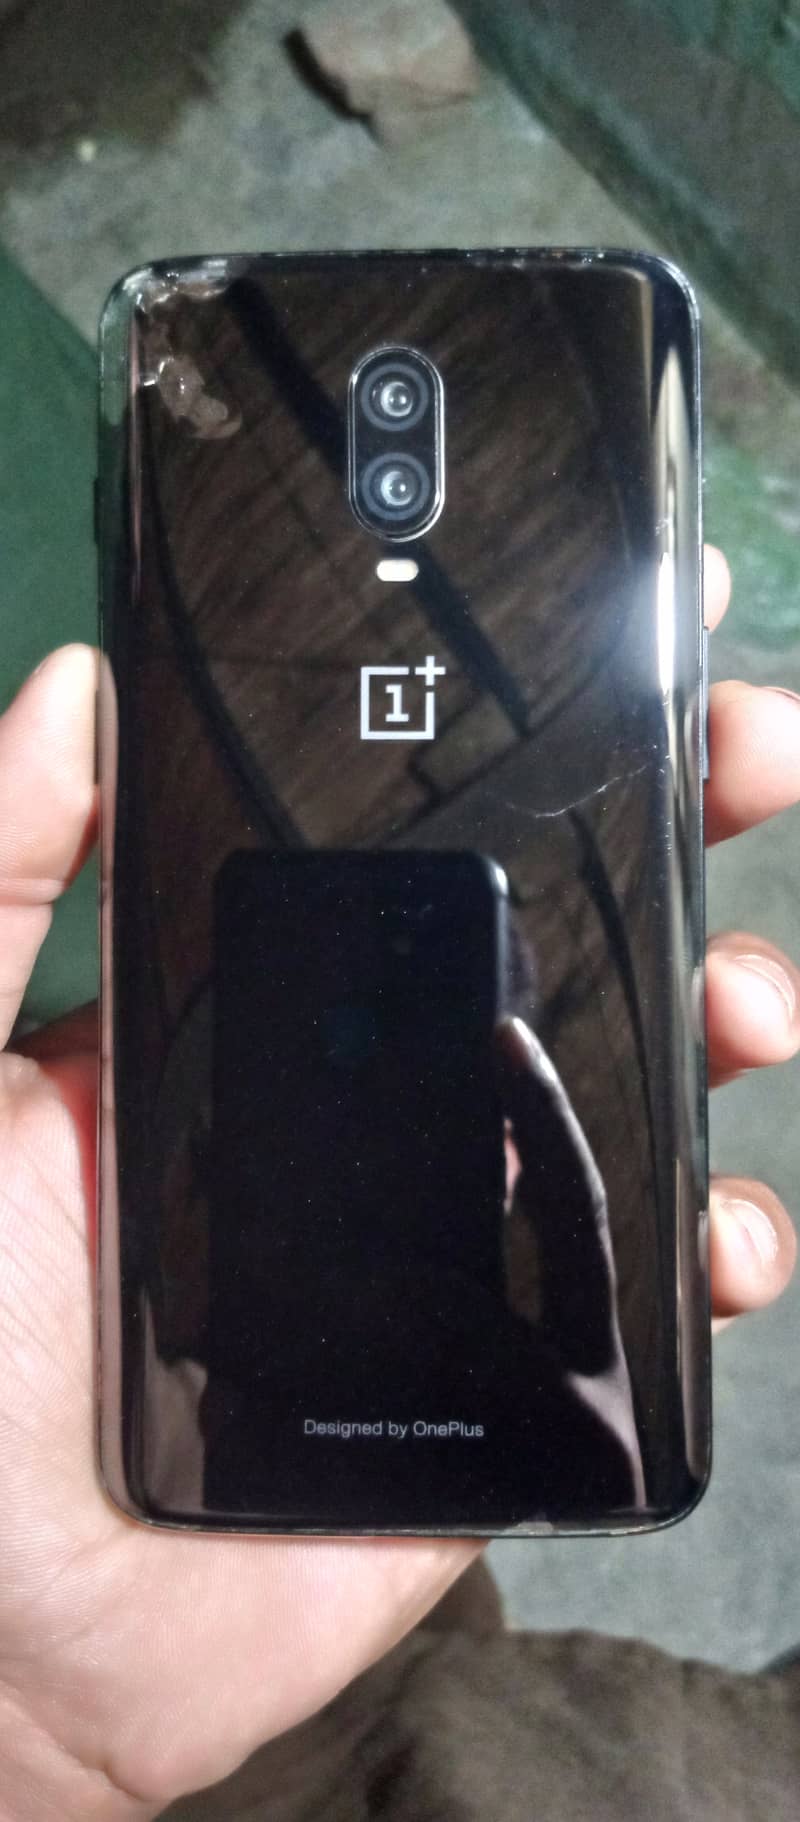 One plus 8gb ram  256gb rom condition 10 by 9 5